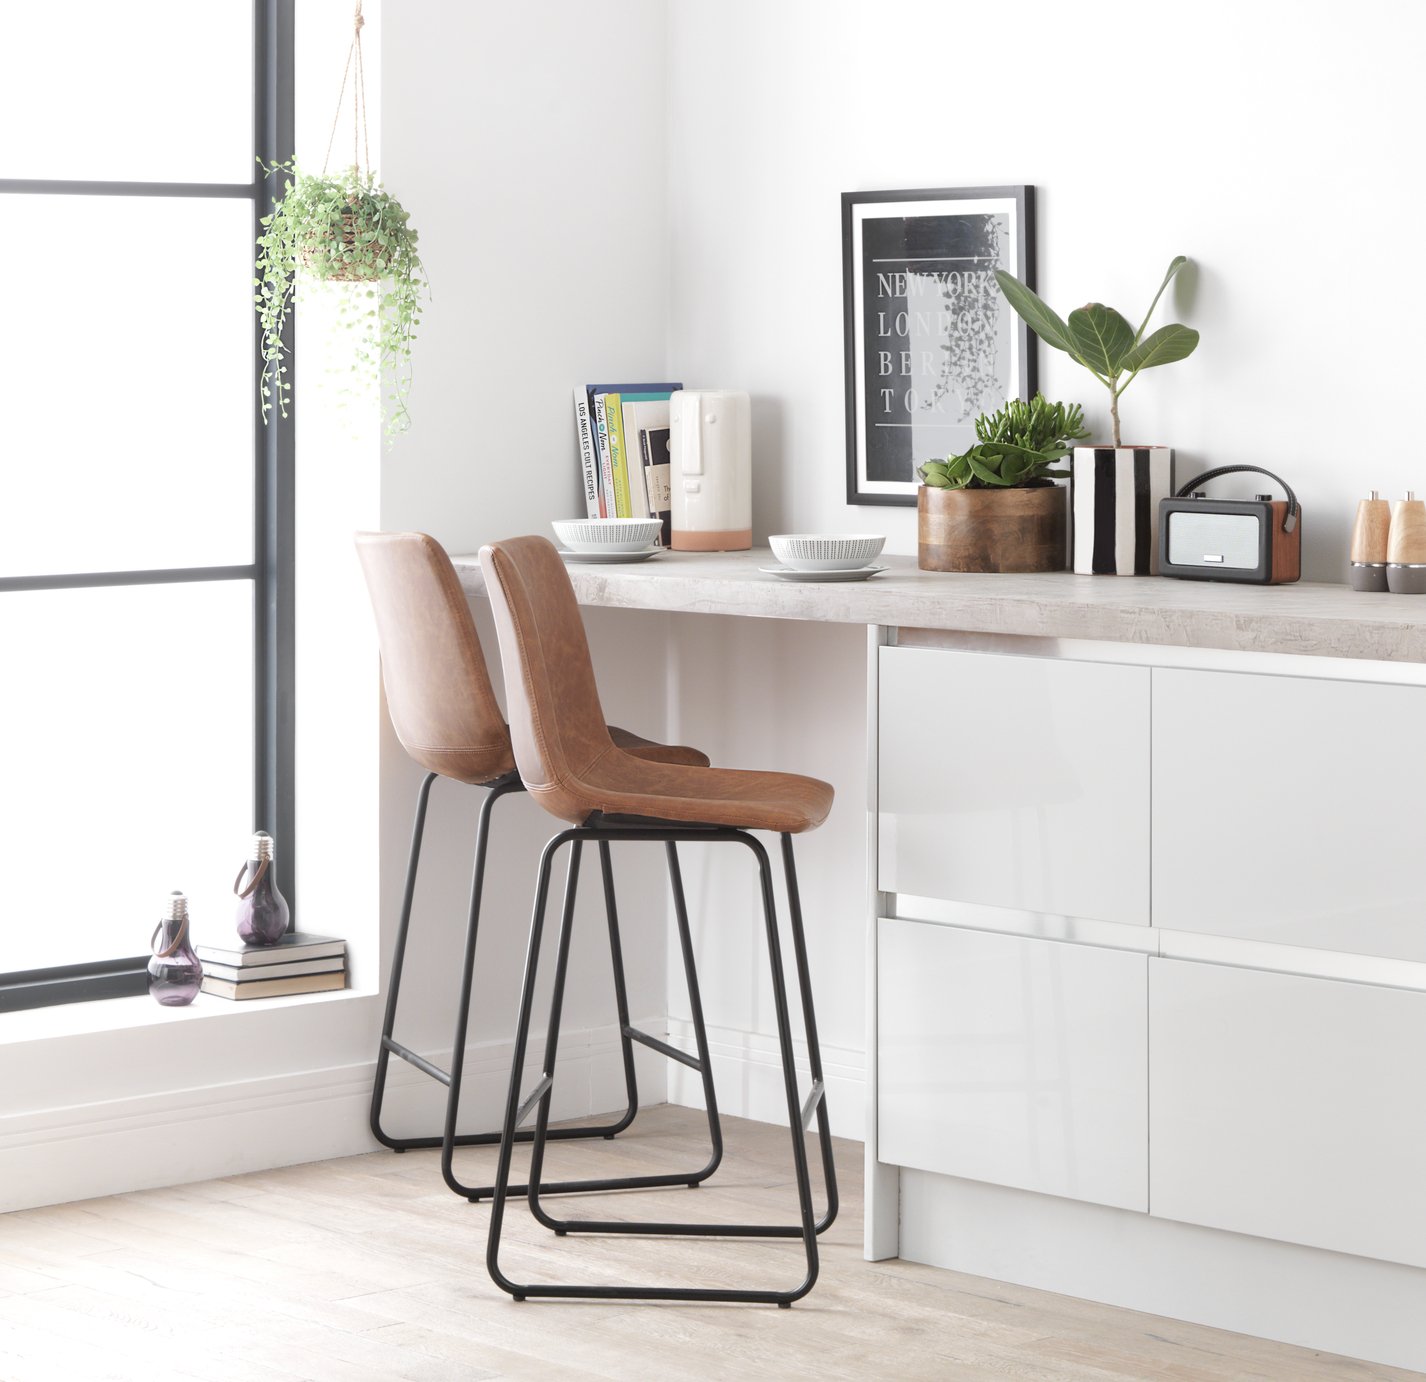 Argos Home Joey Faux Leather Bar Stool Review